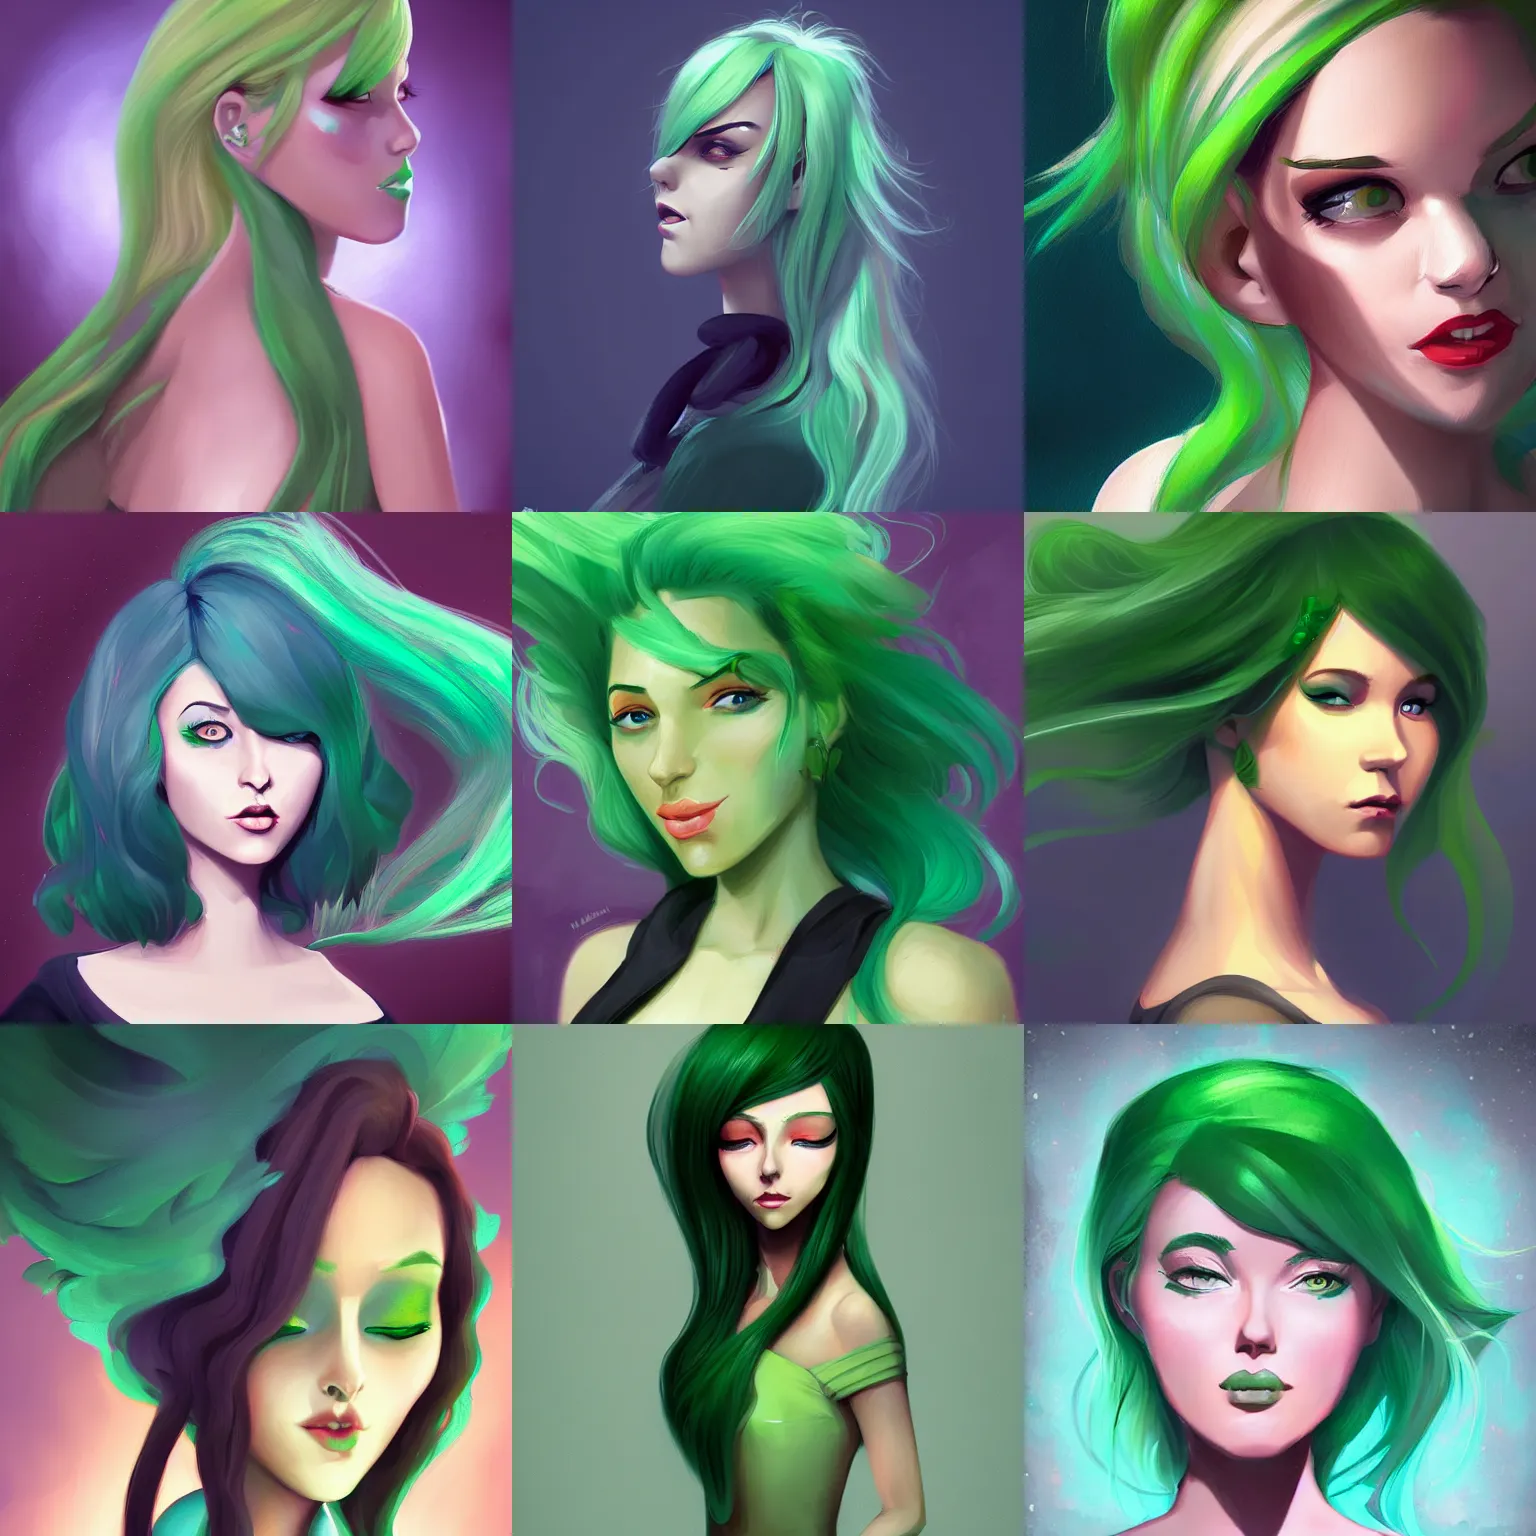 Prompt: a digital painting of a woman with green hair, a character portrait by Lois van Baarle, featured on cgsociety, digital art, digital painting, deviantart hd, digital illustration